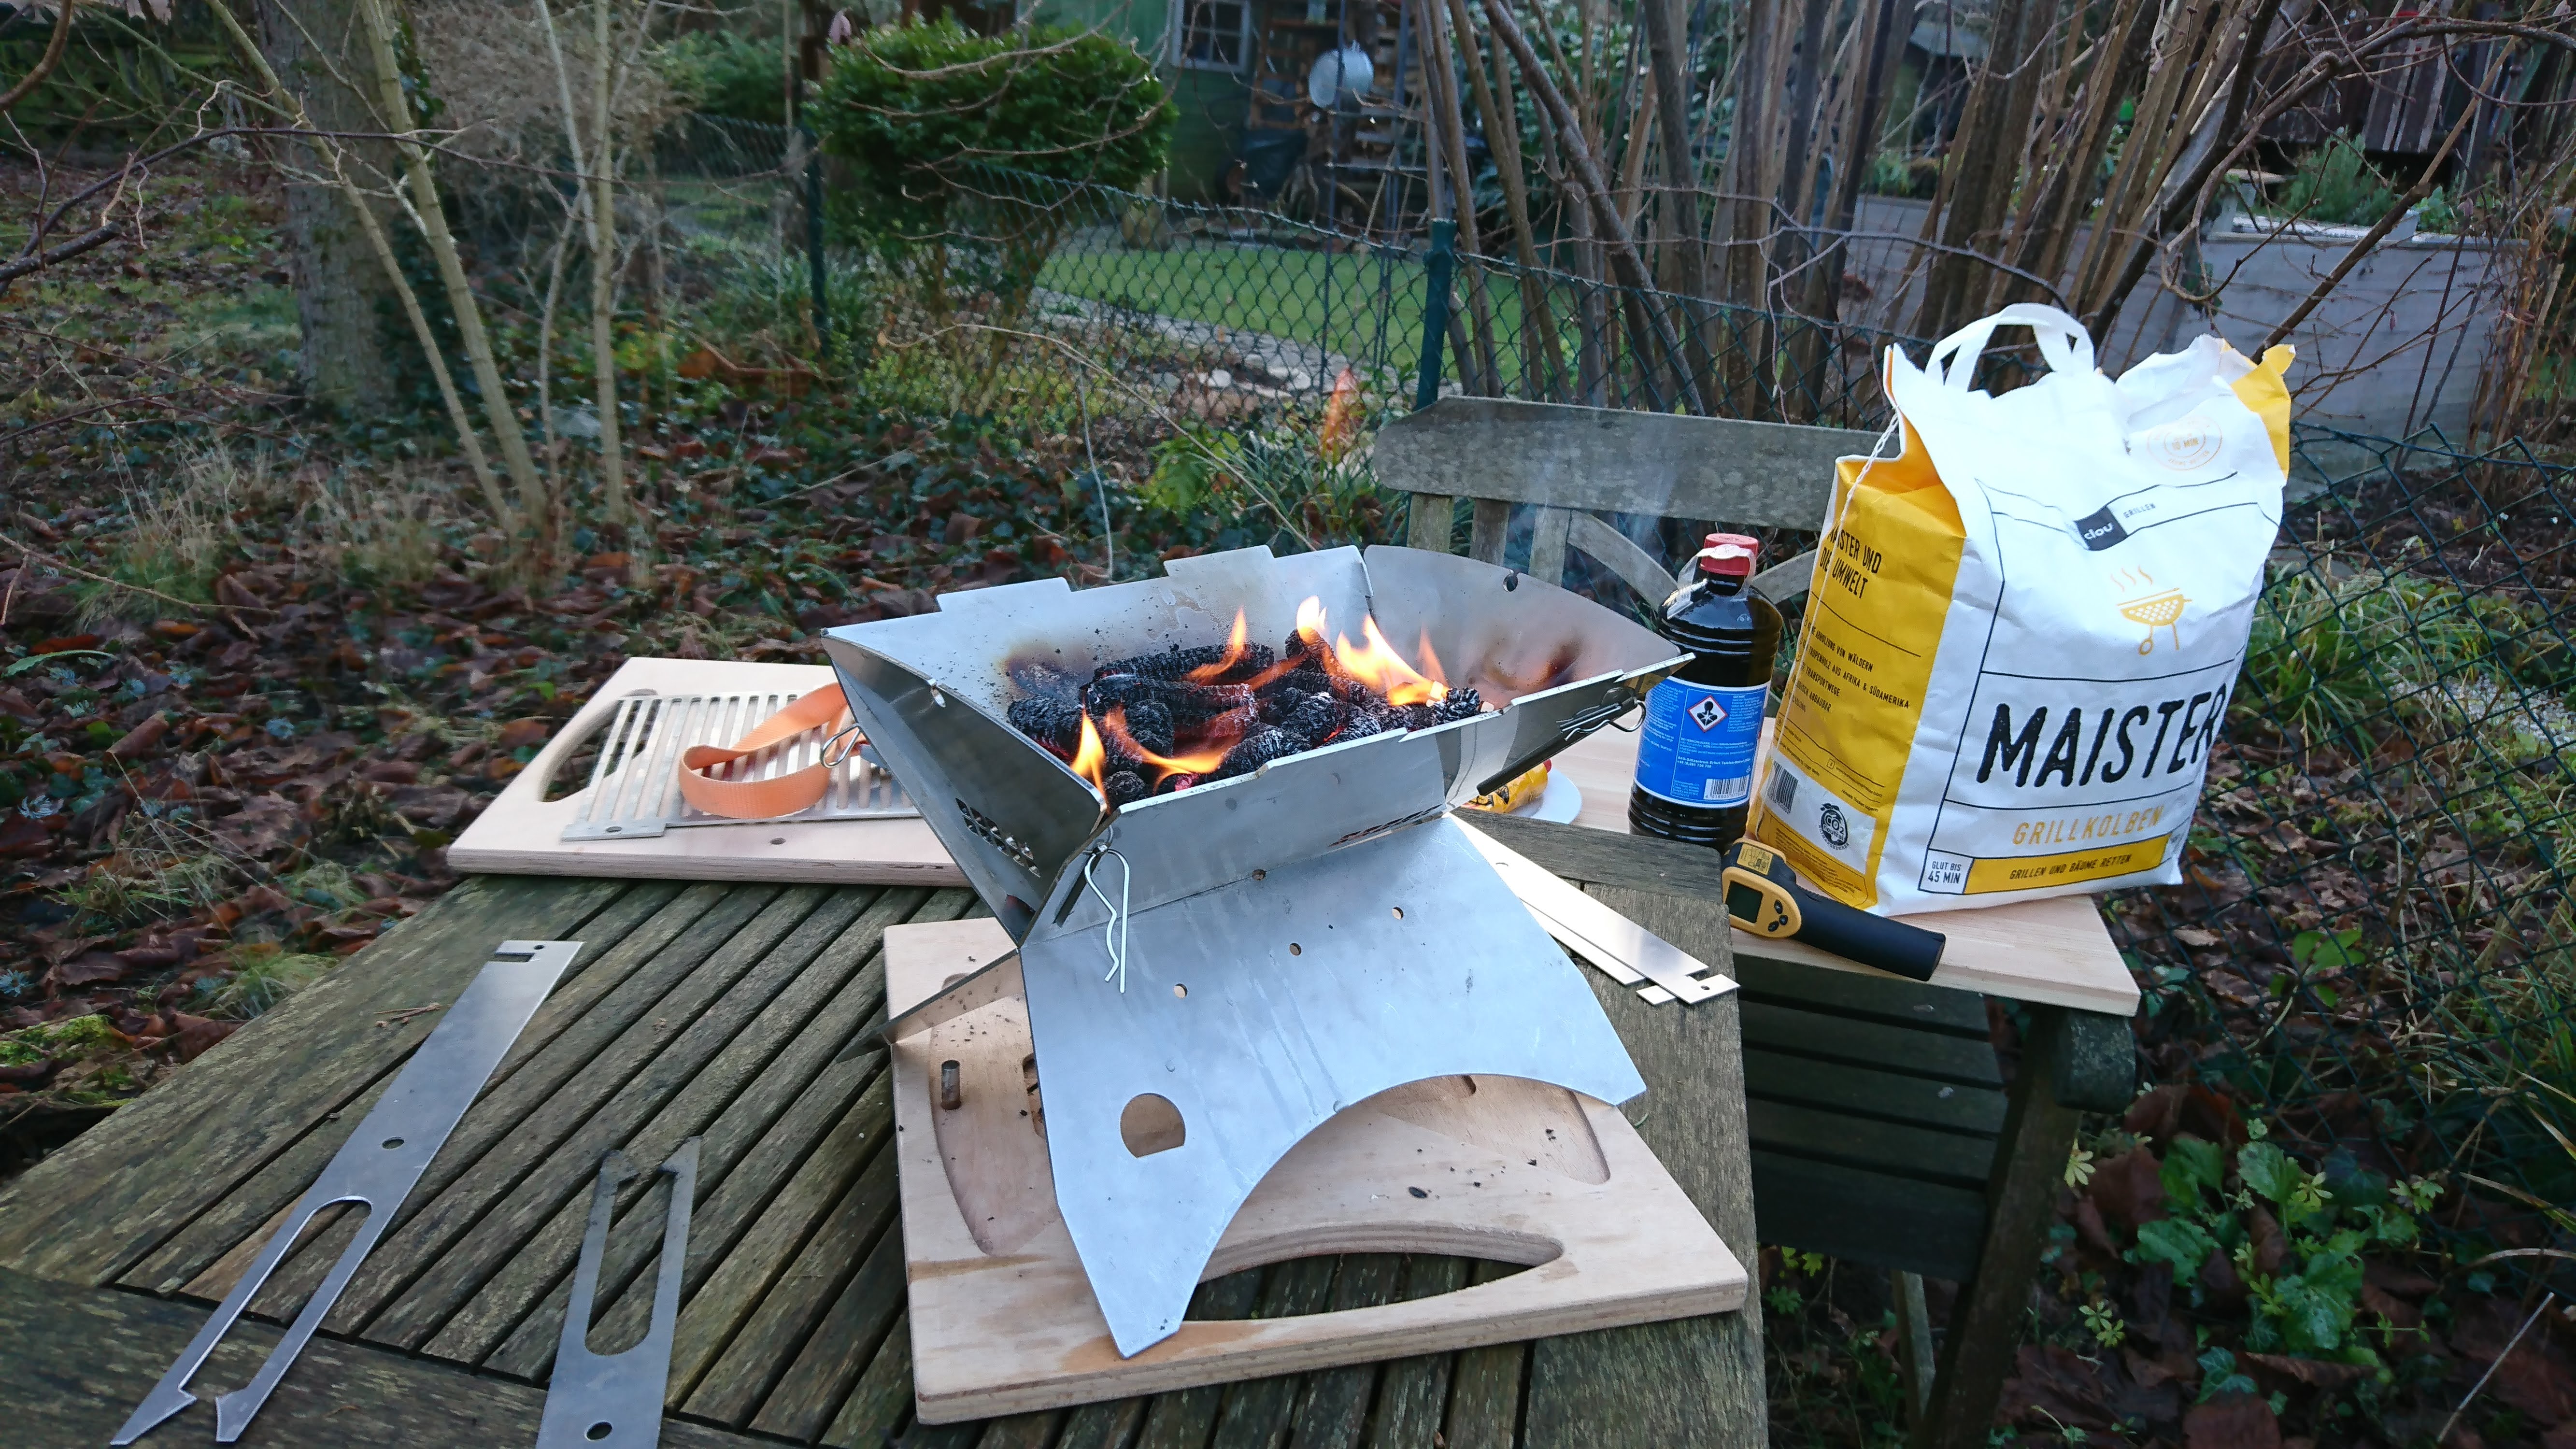 Barbecue with corn spindles